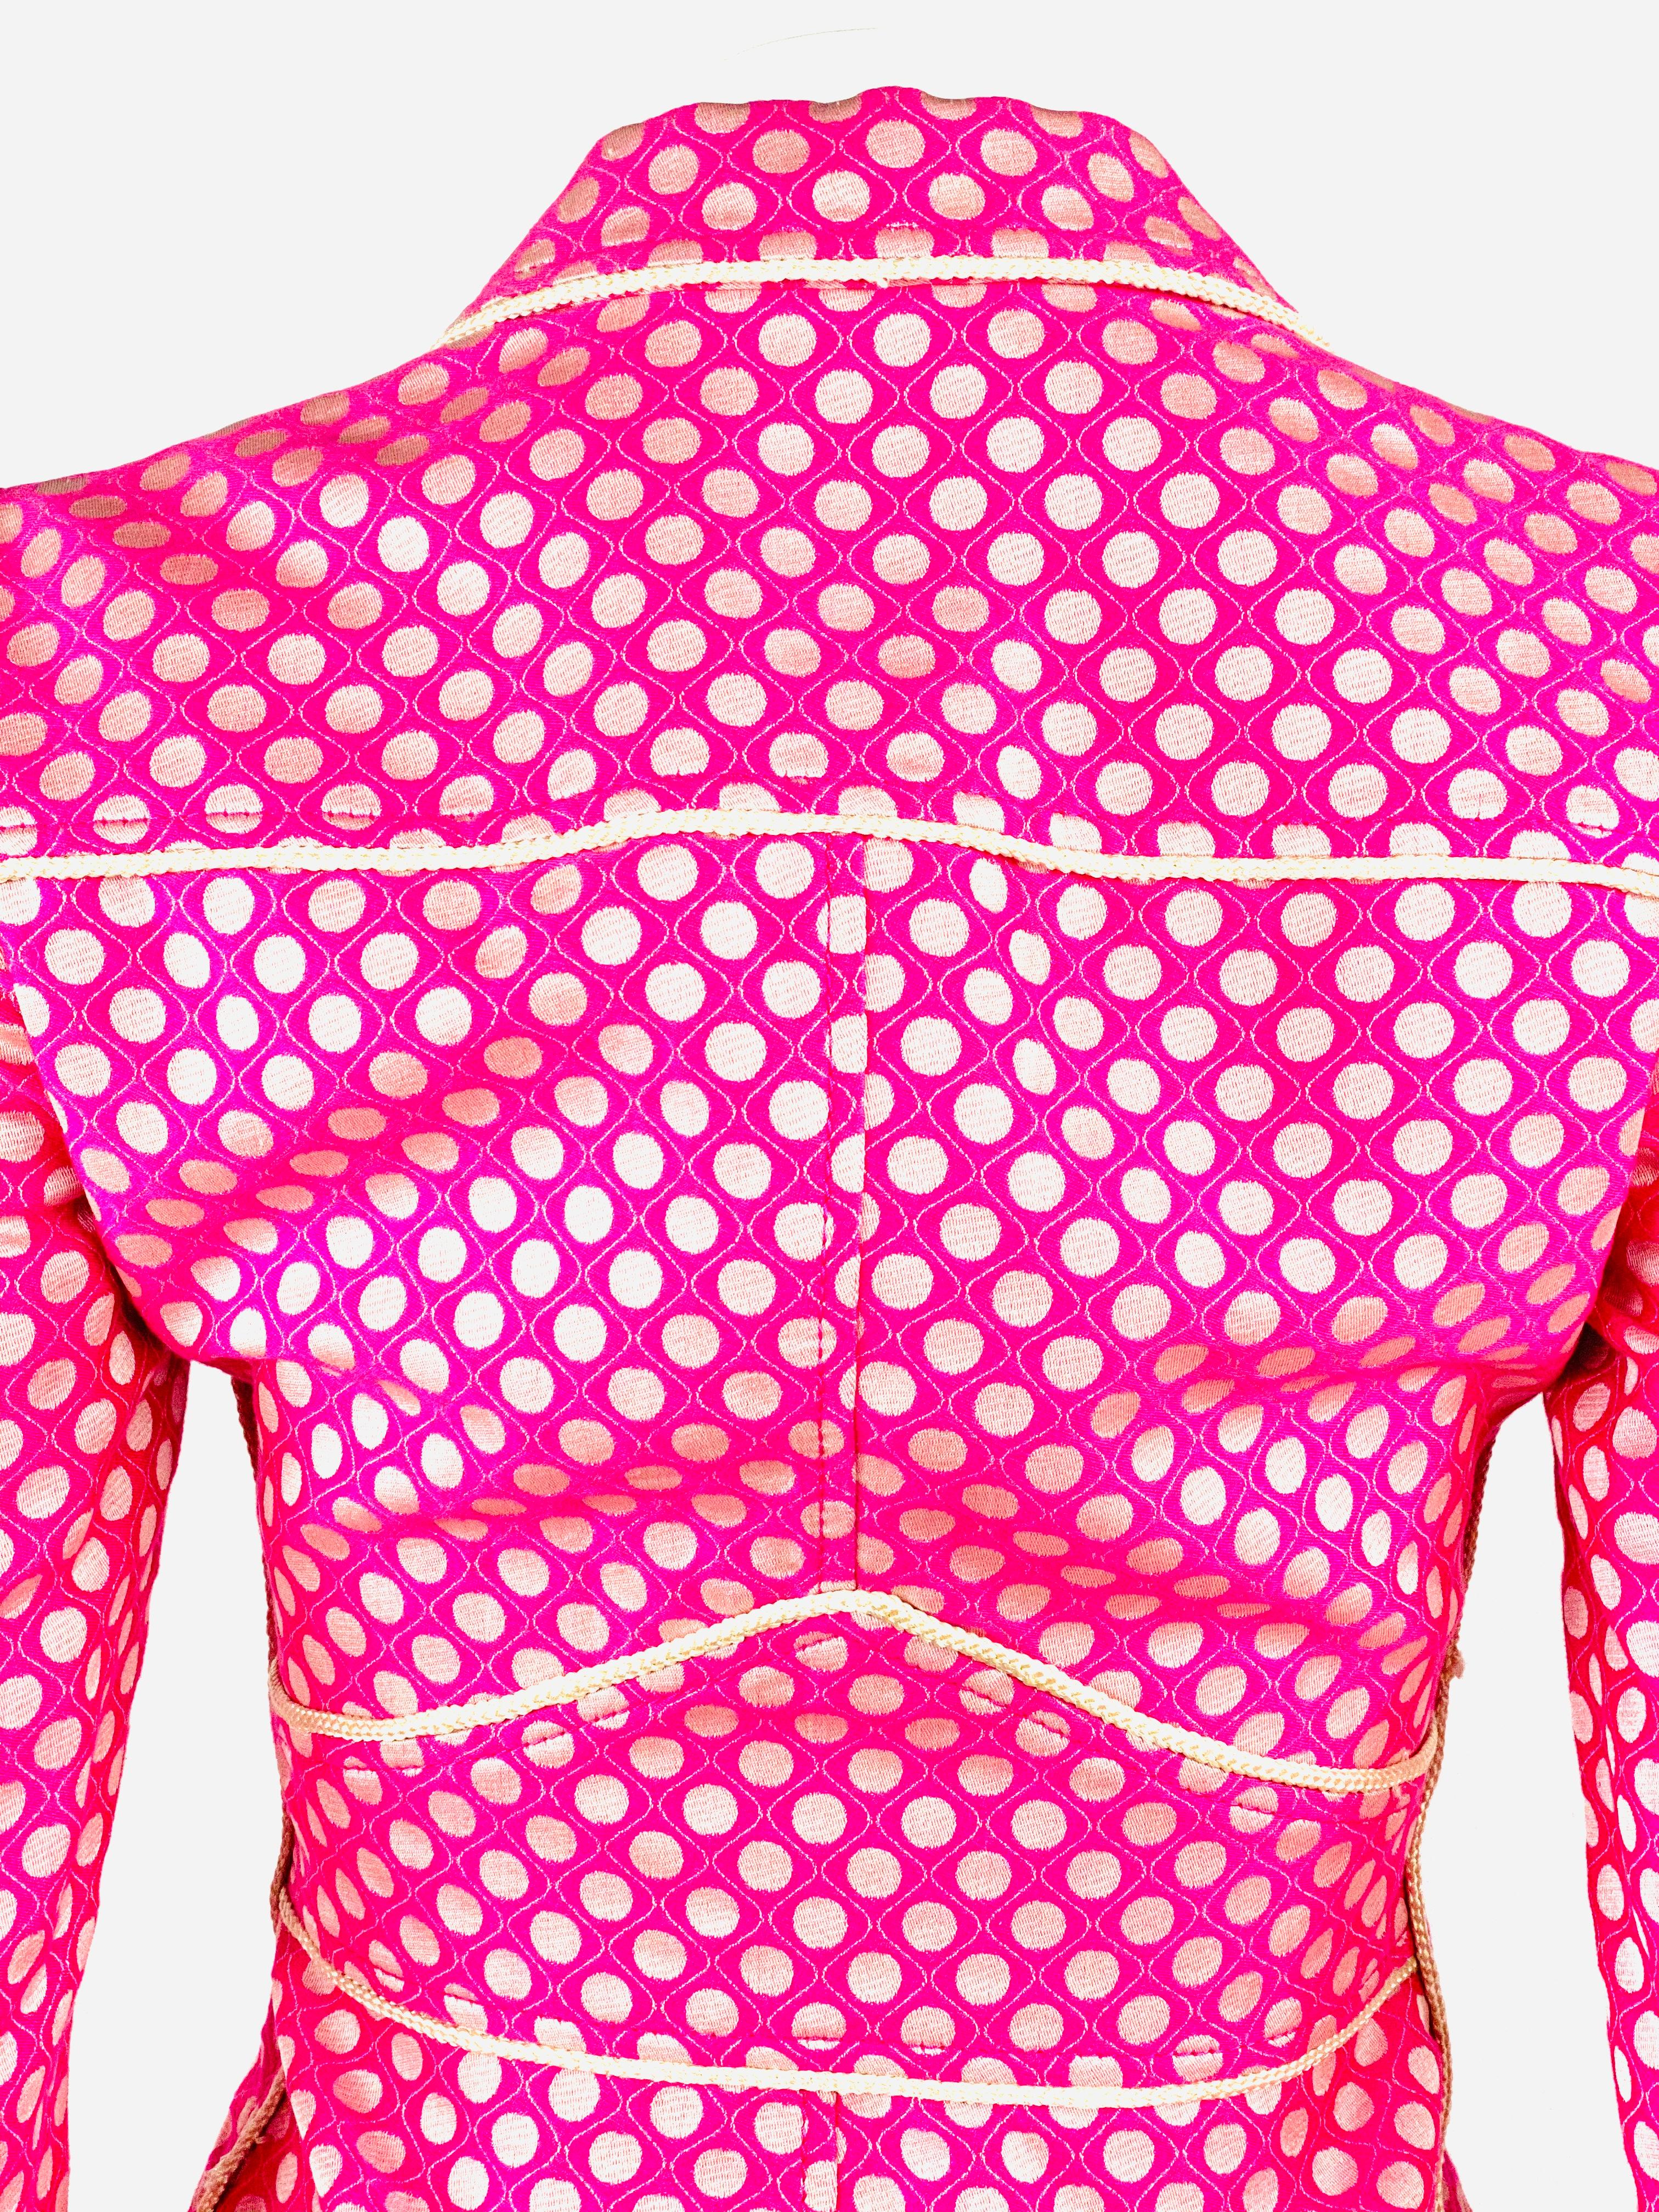 Women's MOSCHINO Cheap and Chic Pink Polka Dot Blazer Jacket w/ Buttons Size 8 For Sale